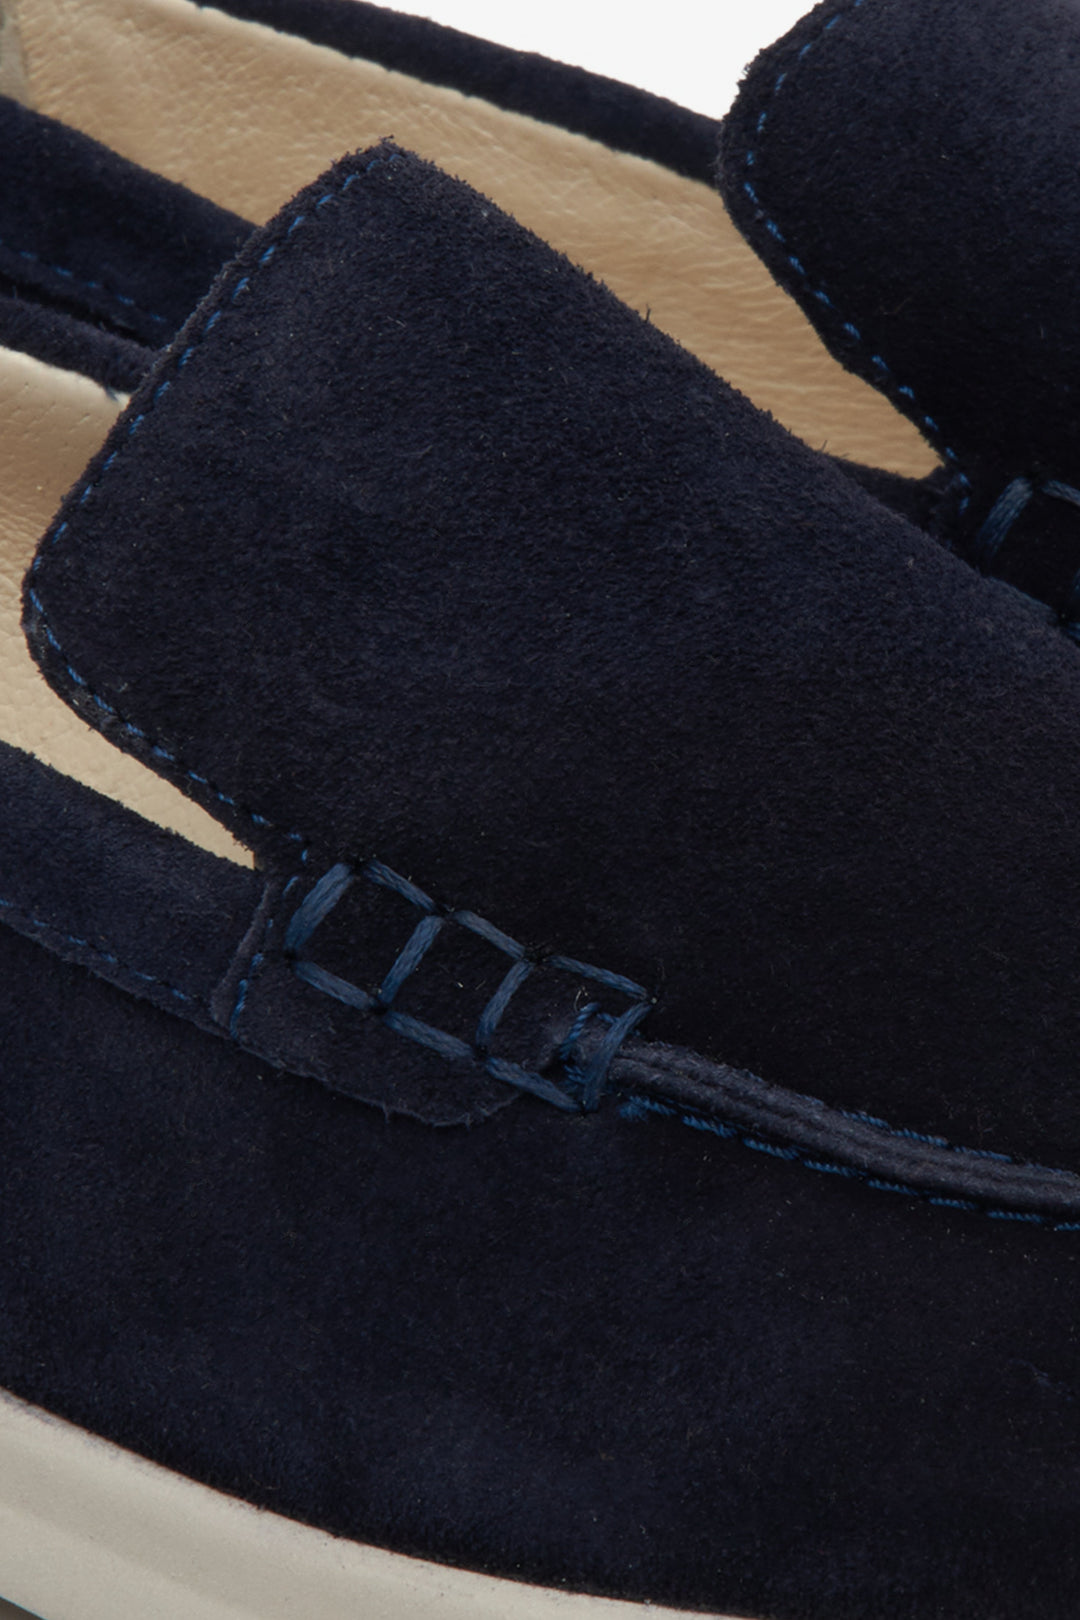 Women's navy blue suede Estro moccasins - close-up of the sewing system.